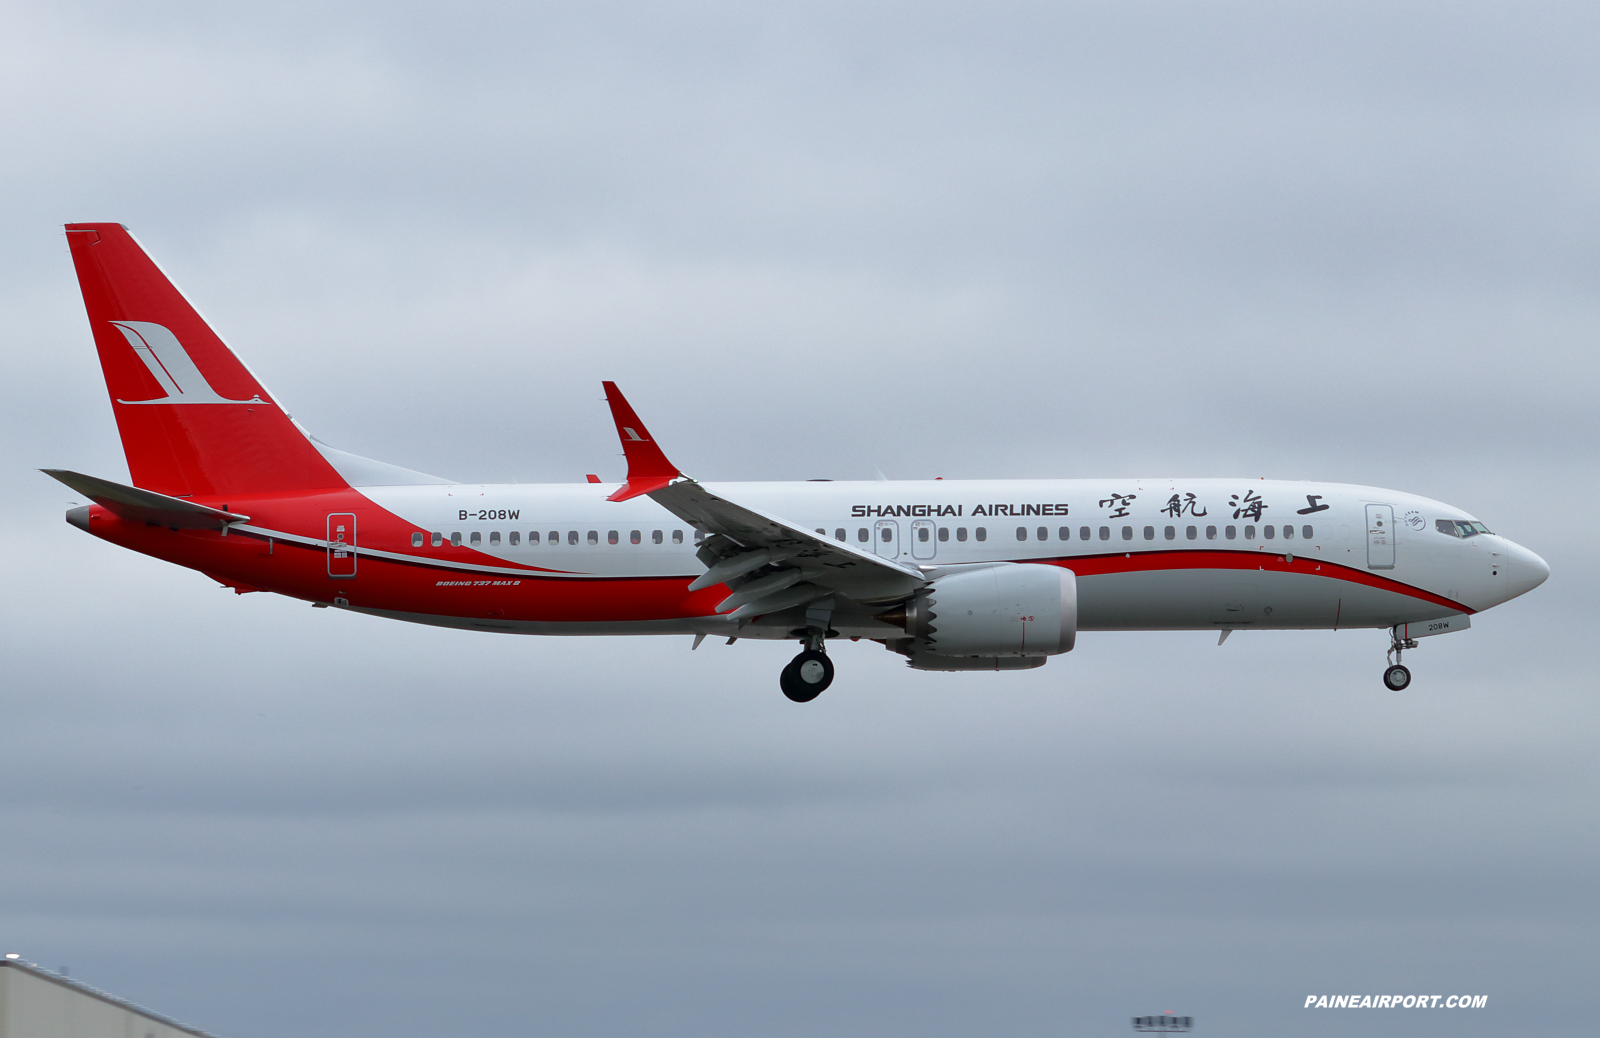 Shangahai Airlines 737 B-208W at Paine Field